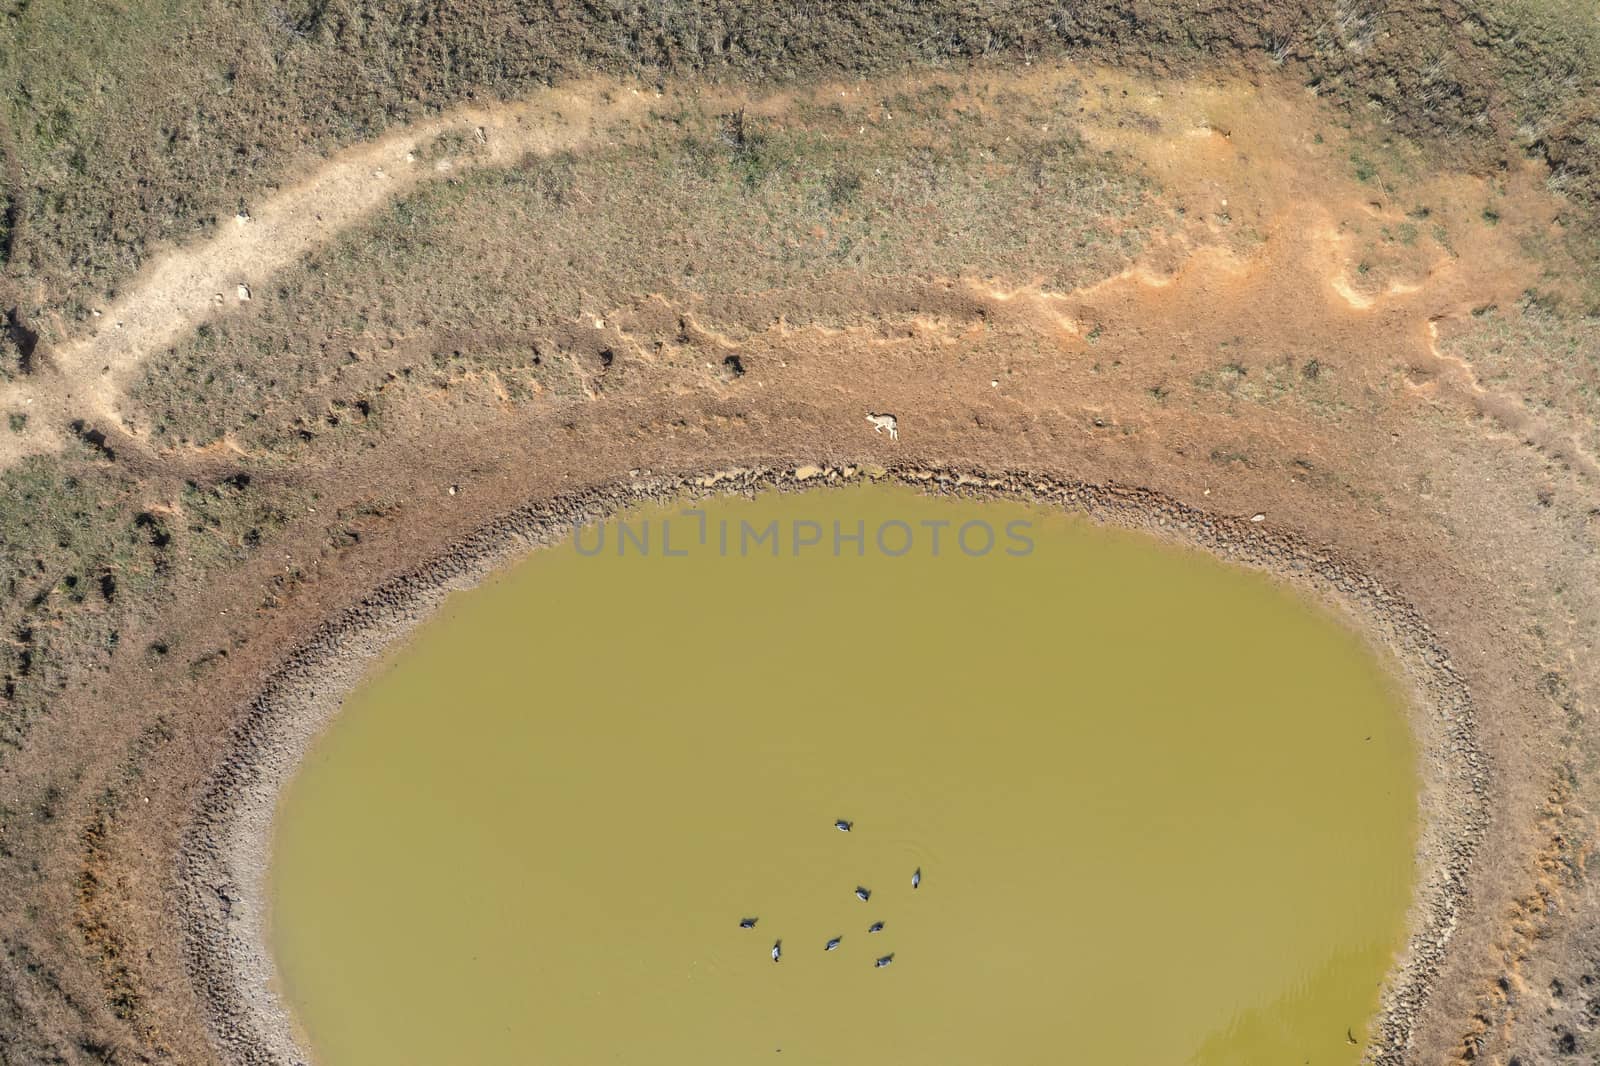 Ducks swimming in a dry agricultural irrigation dam in regional Australia by WittkePhotos